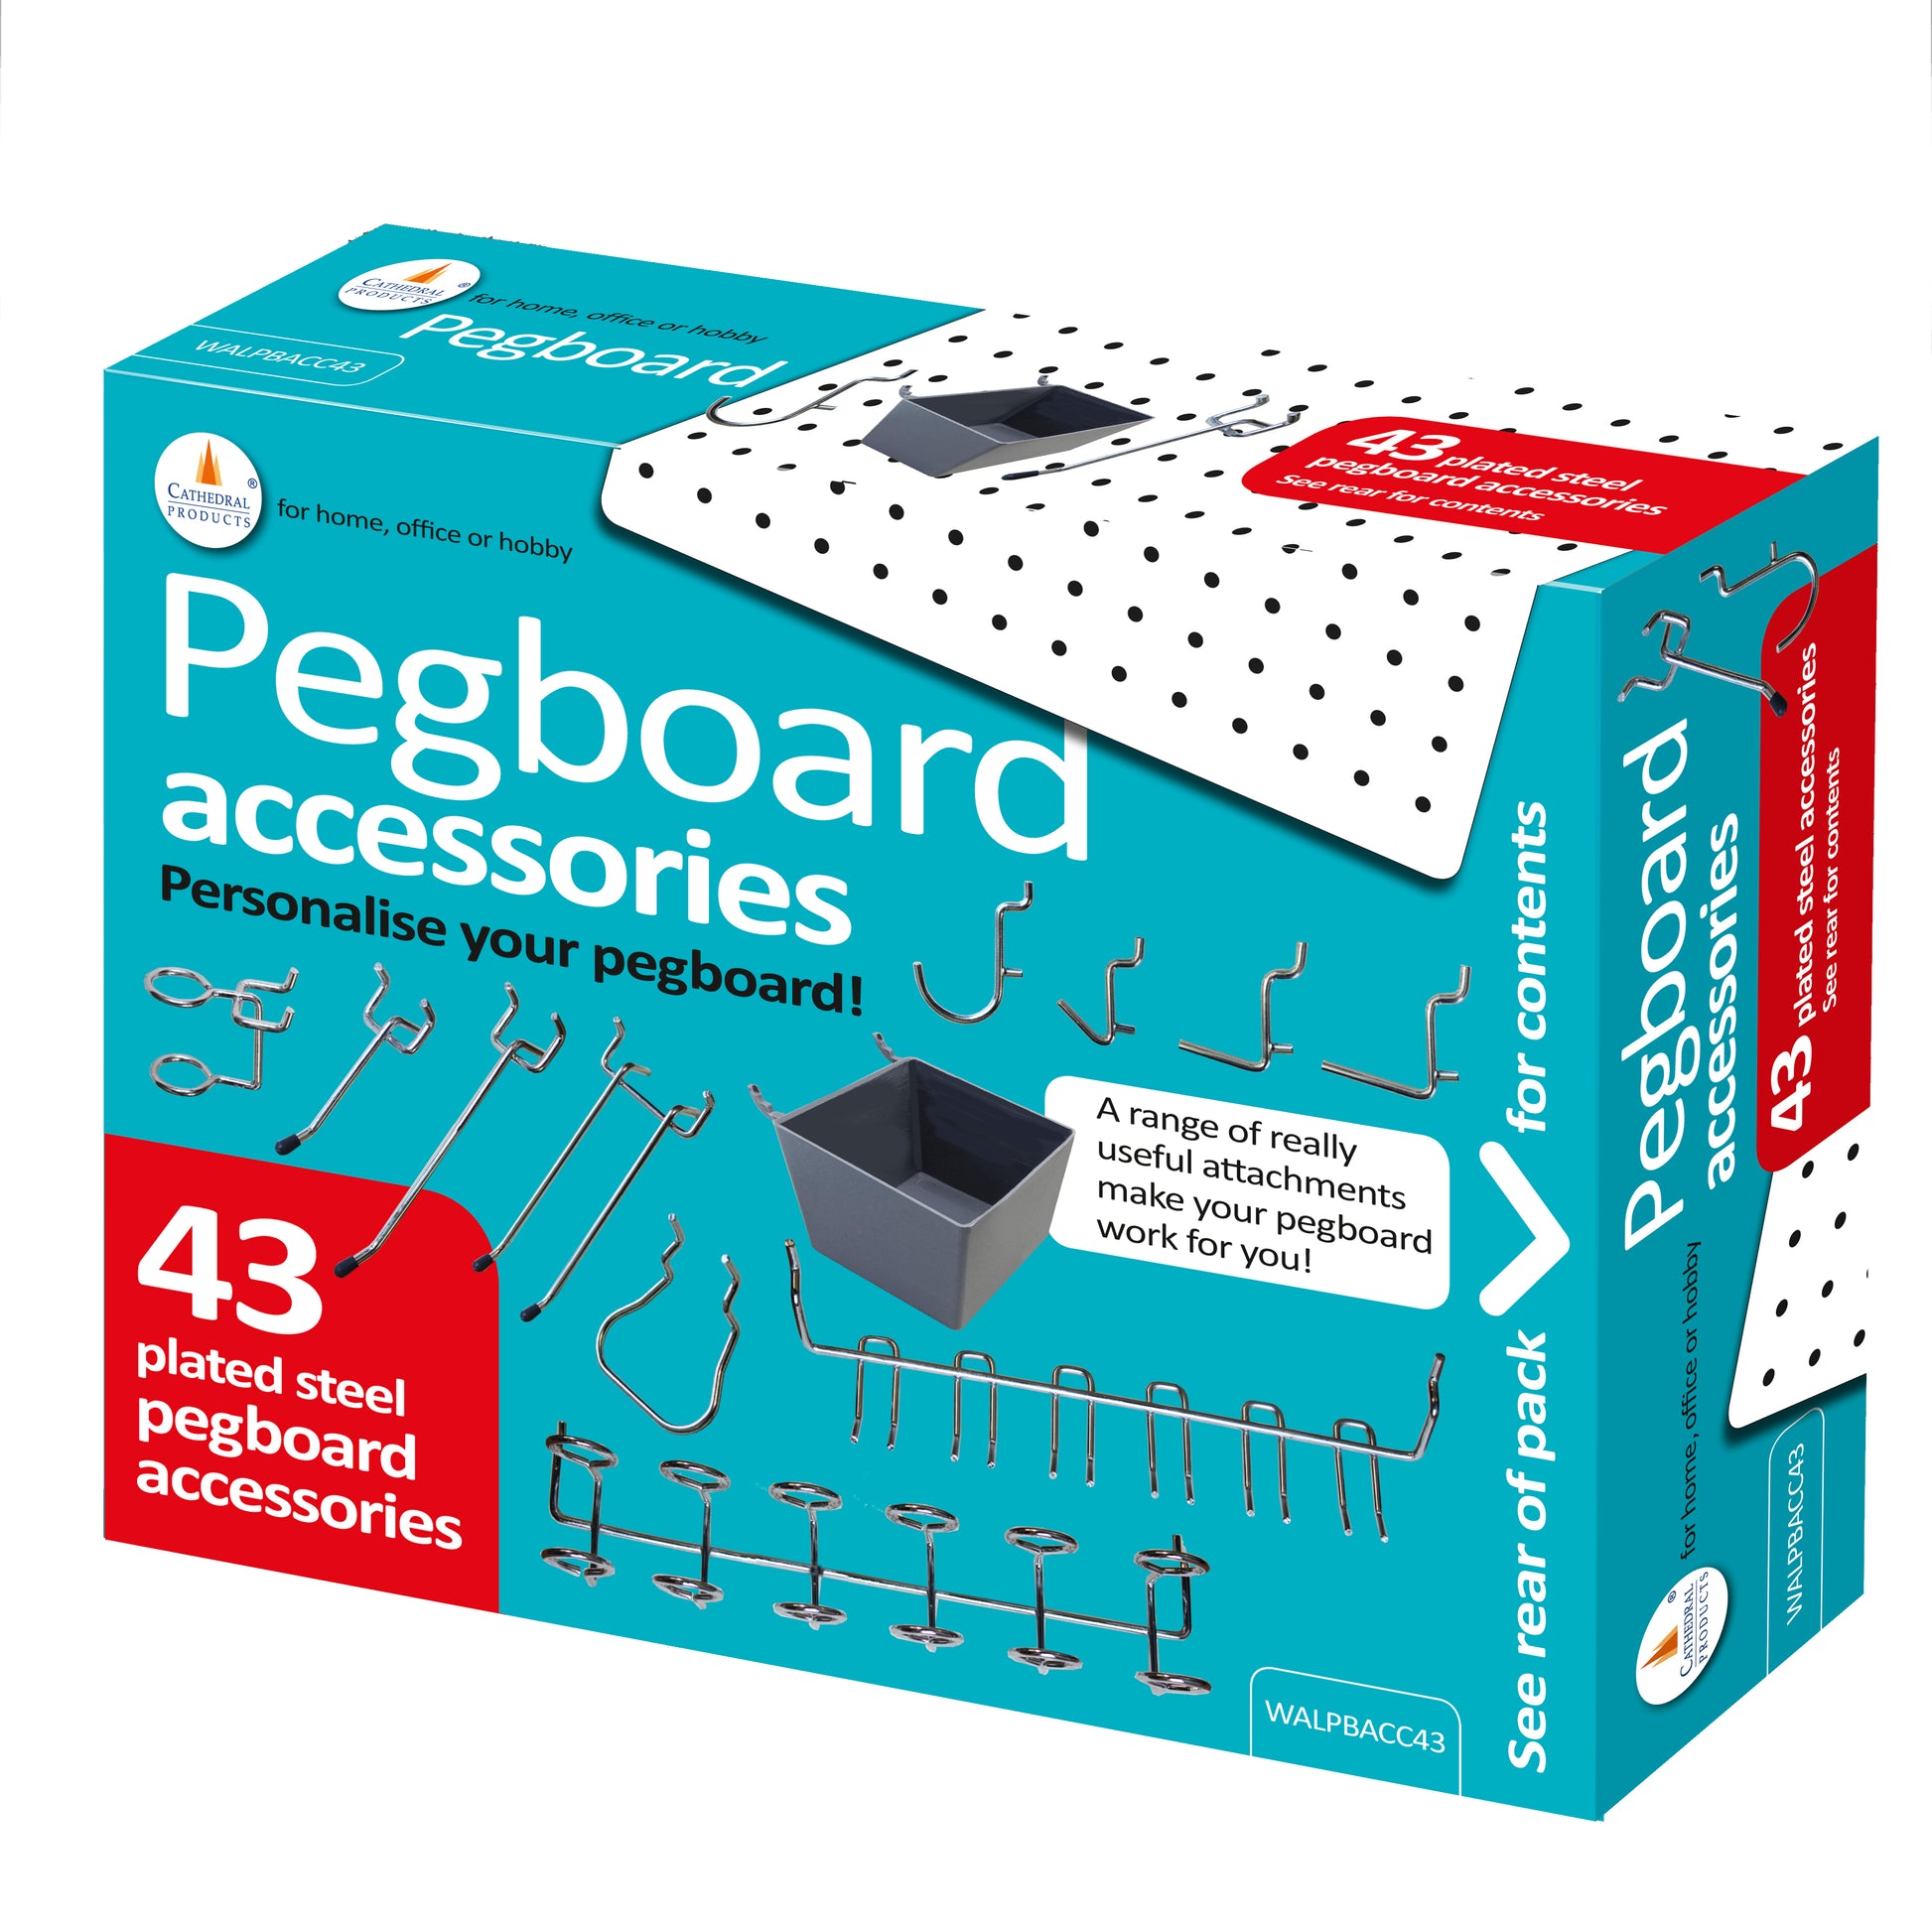 Packaging of Cathedral Products Pegboard Accessories set featuring 43 plated steel attachments, with images of various hooks and a gray bin, advertised for home or office pegboard customization.